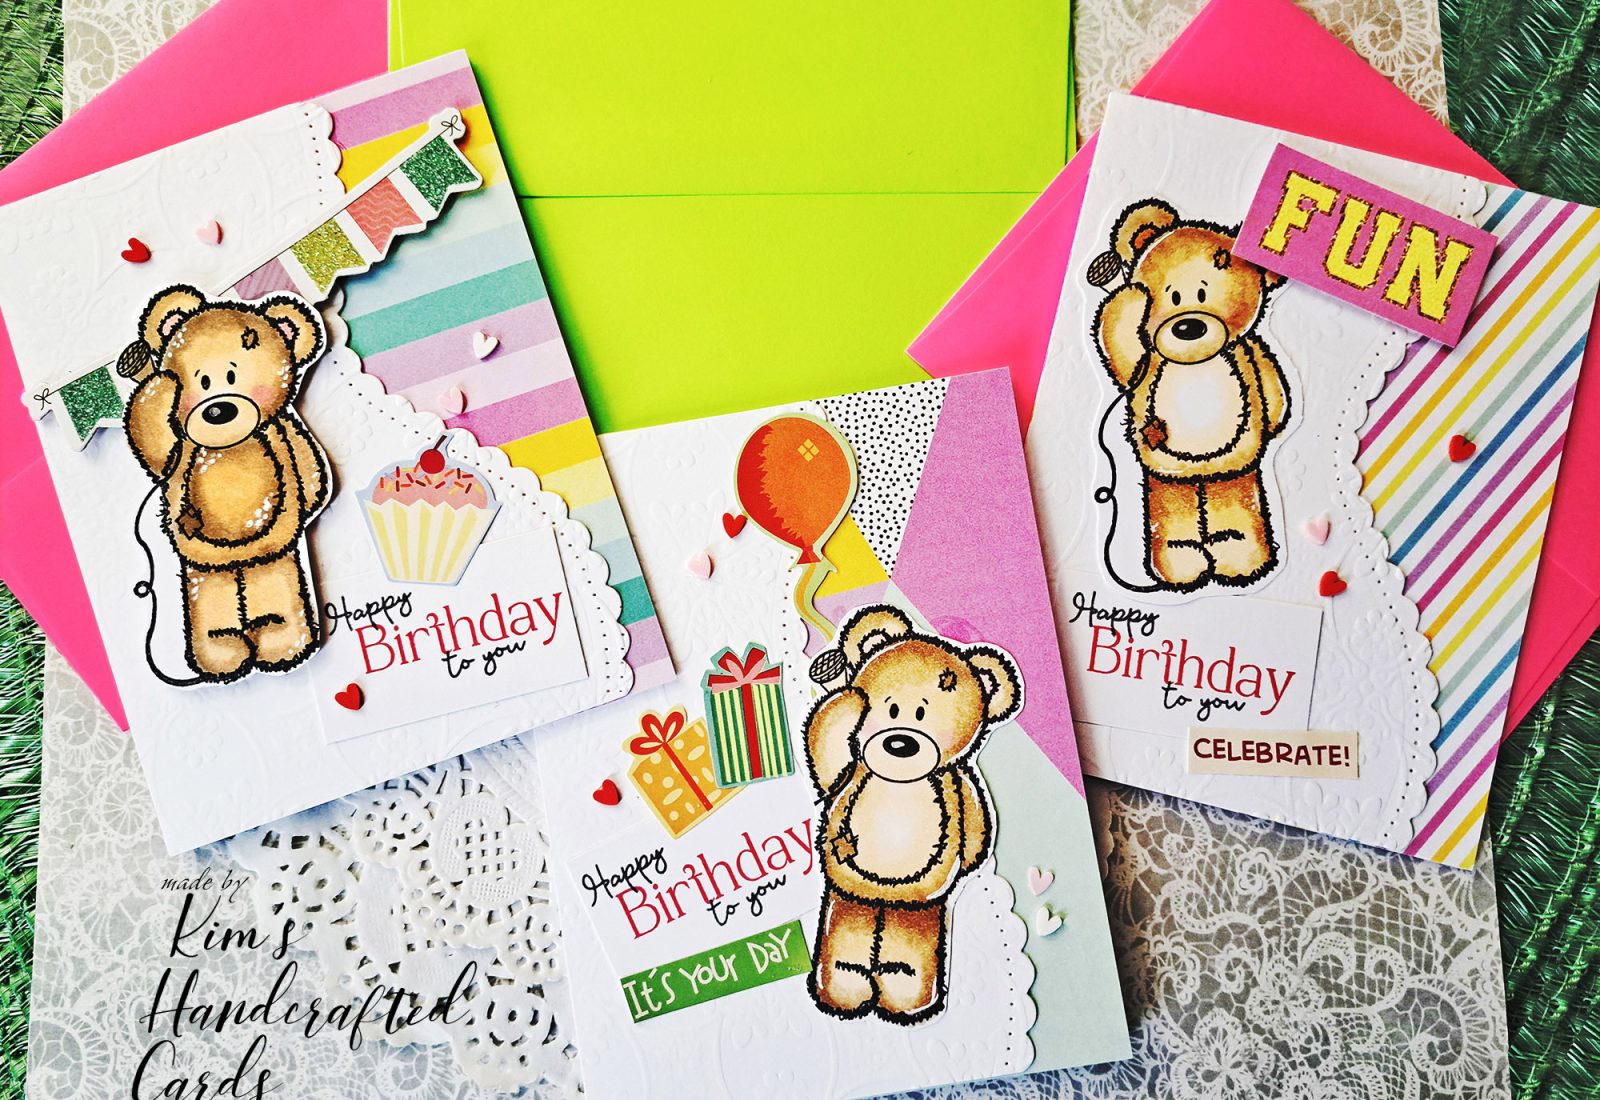 Sweet Birthday Cards using a Stamp Set from the “Precious Bears”Collection from The Diary of Belle Rose